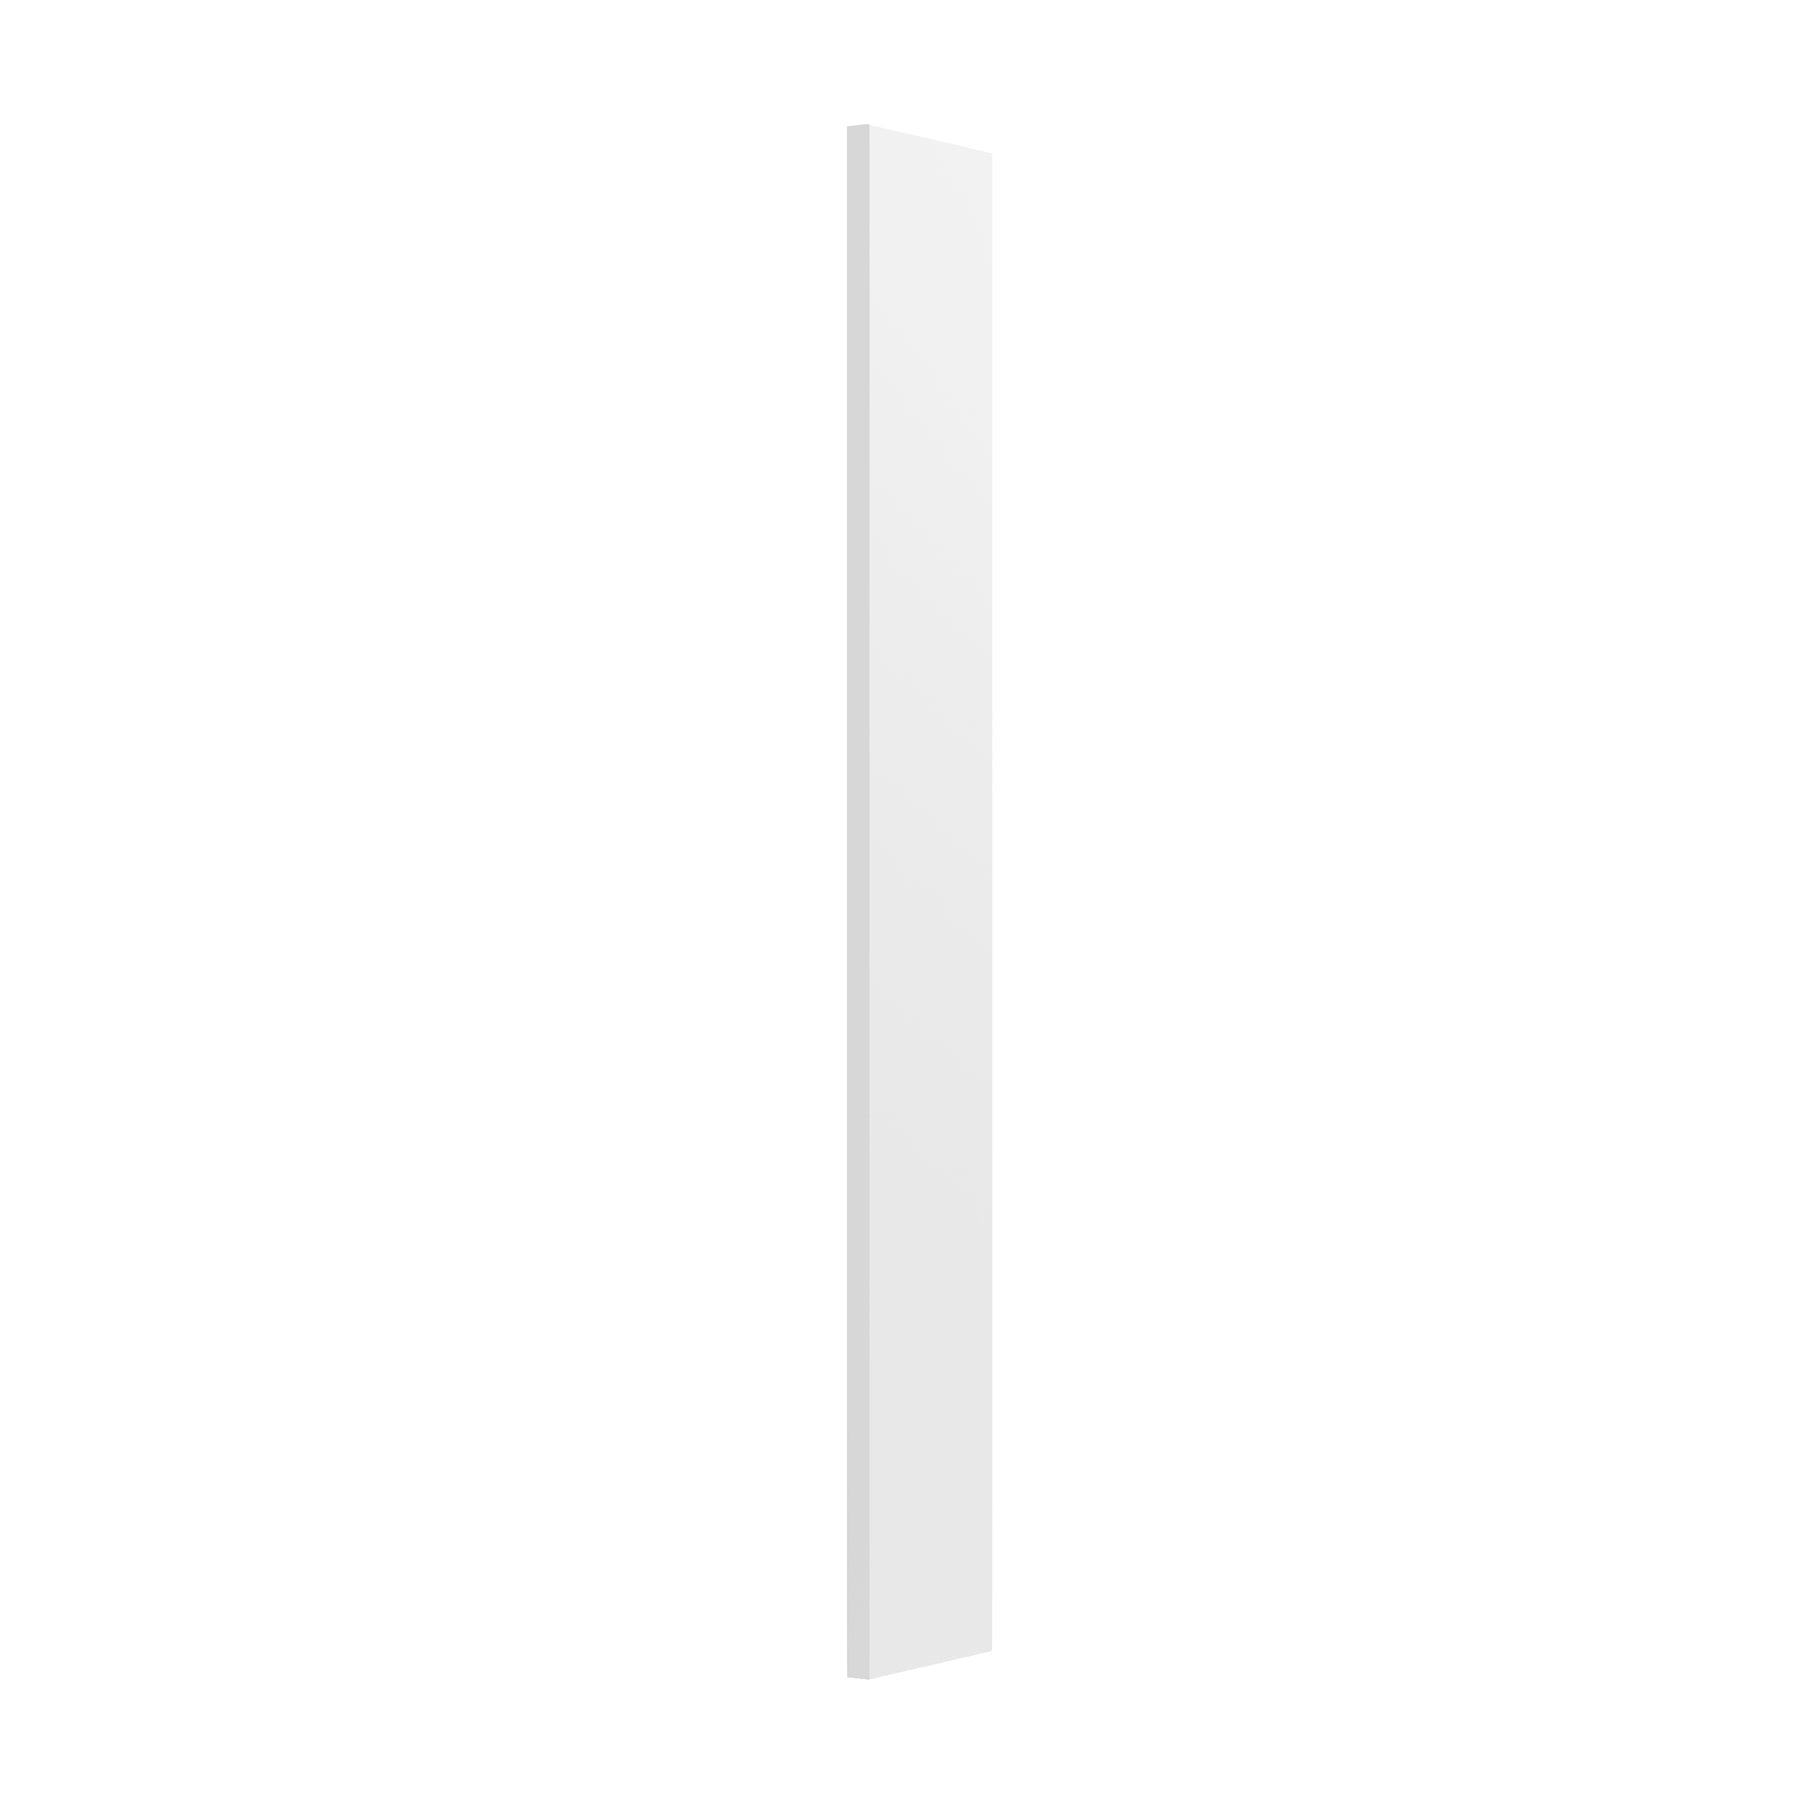 30 Inch High Wall Filler For Cabinet - Luxor White Shaker - Ready To Assemble, 6"W x 30"H x 0.75"D